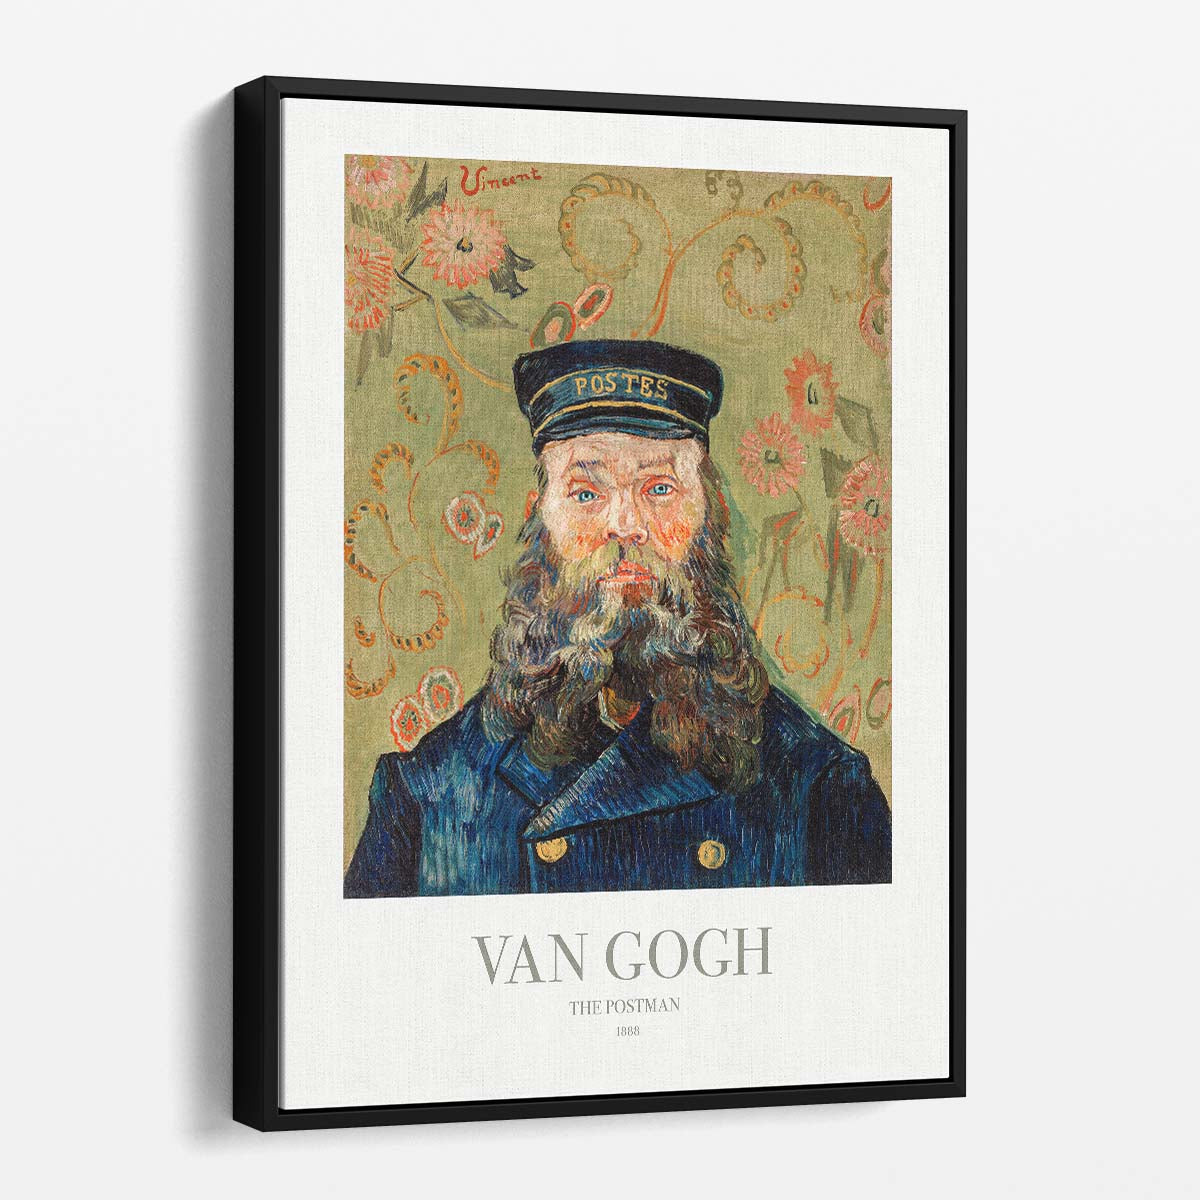 Van Gogh's 'The Postman' Illustrative Acrylic Portrait Painting by Luxuriance Designs, made in USA